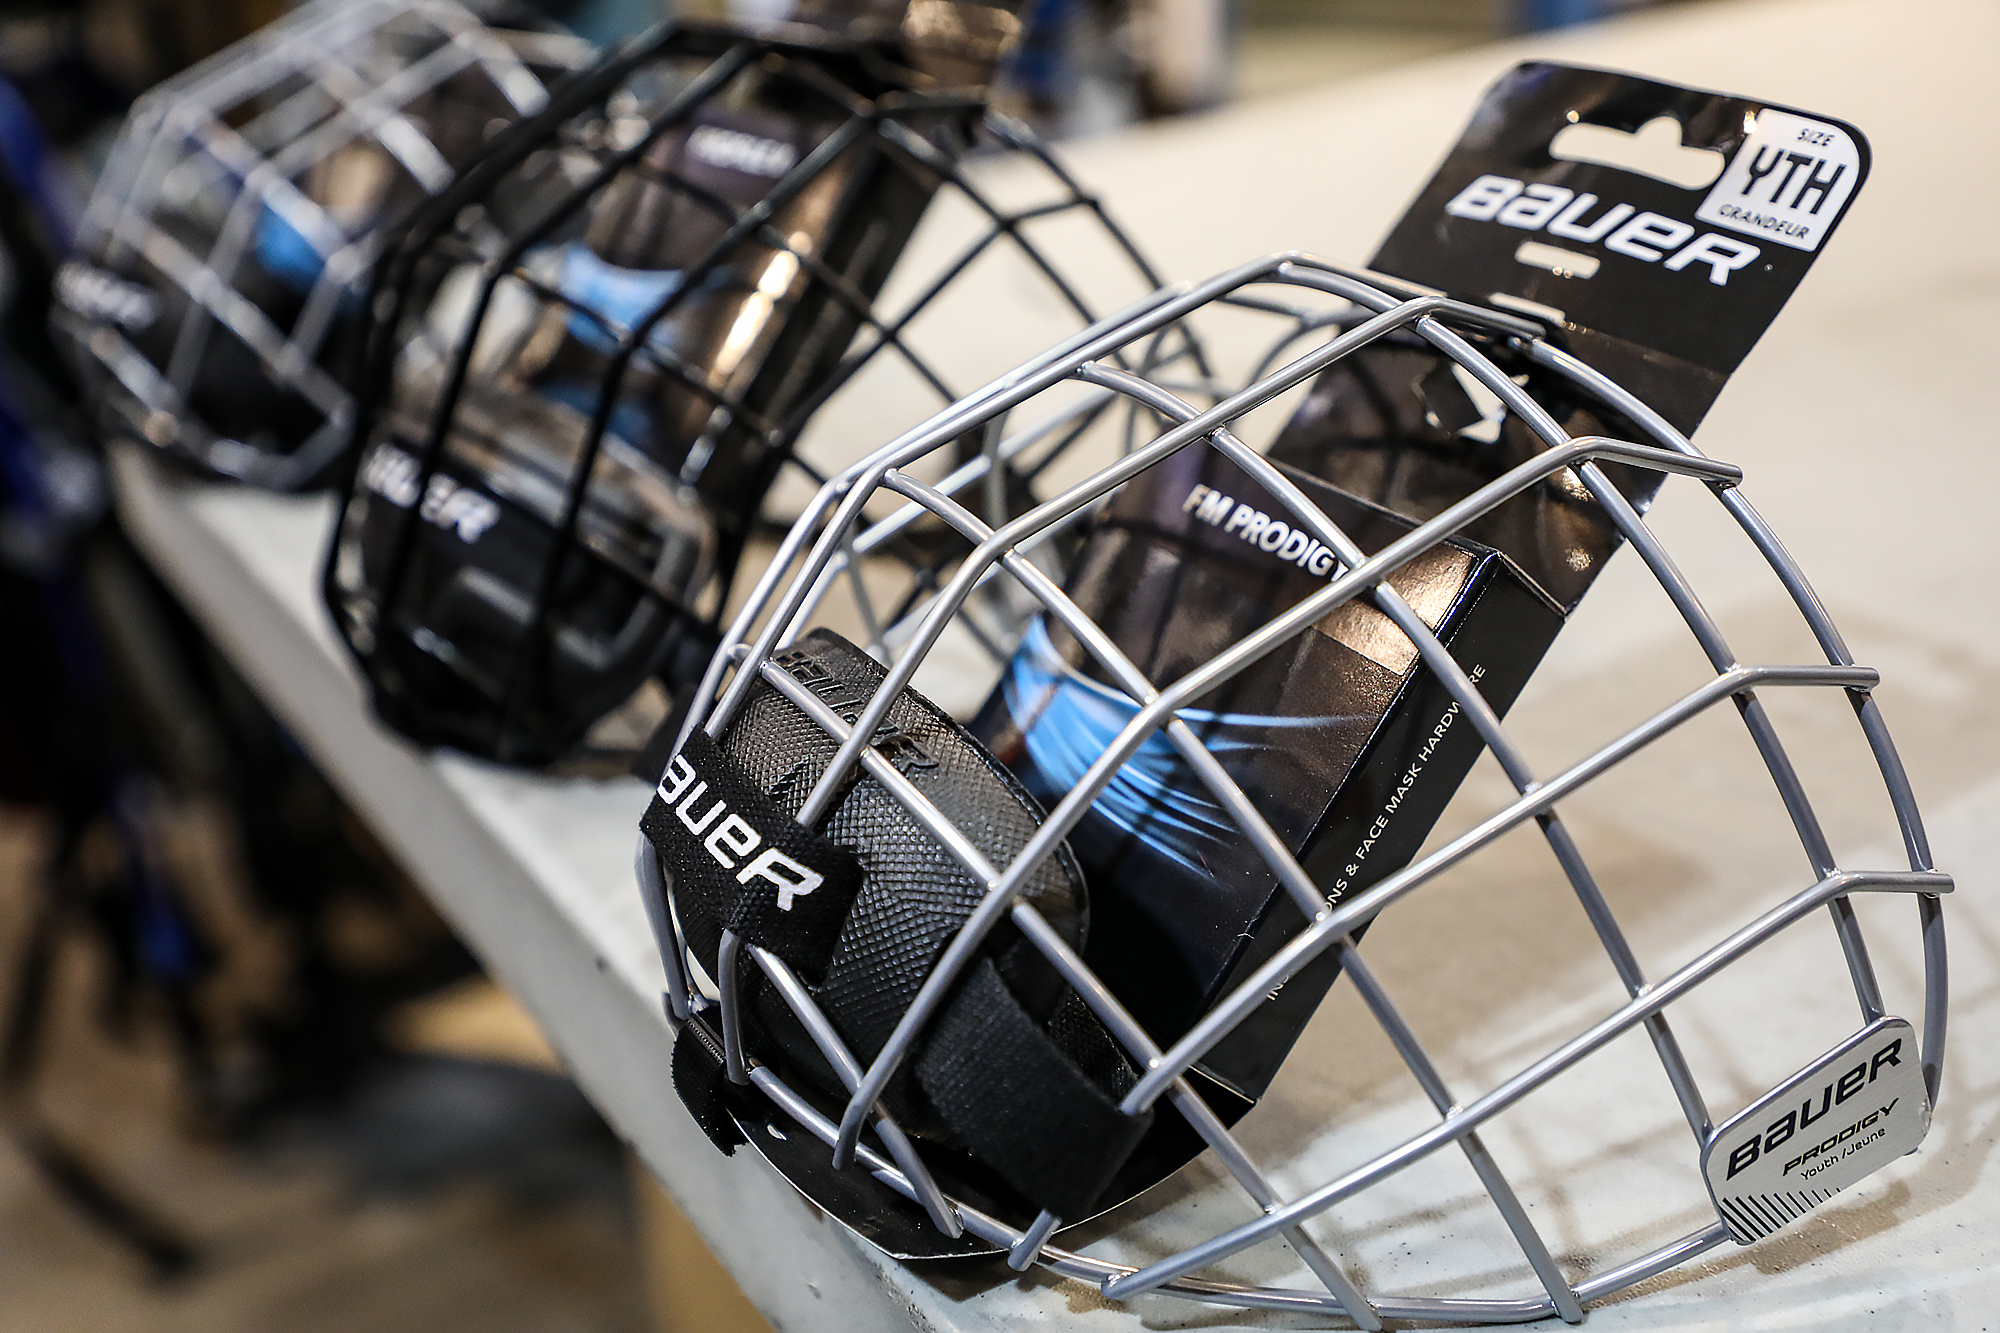 Meet the Canadian artists behind the masks worn by NHL goaltenders